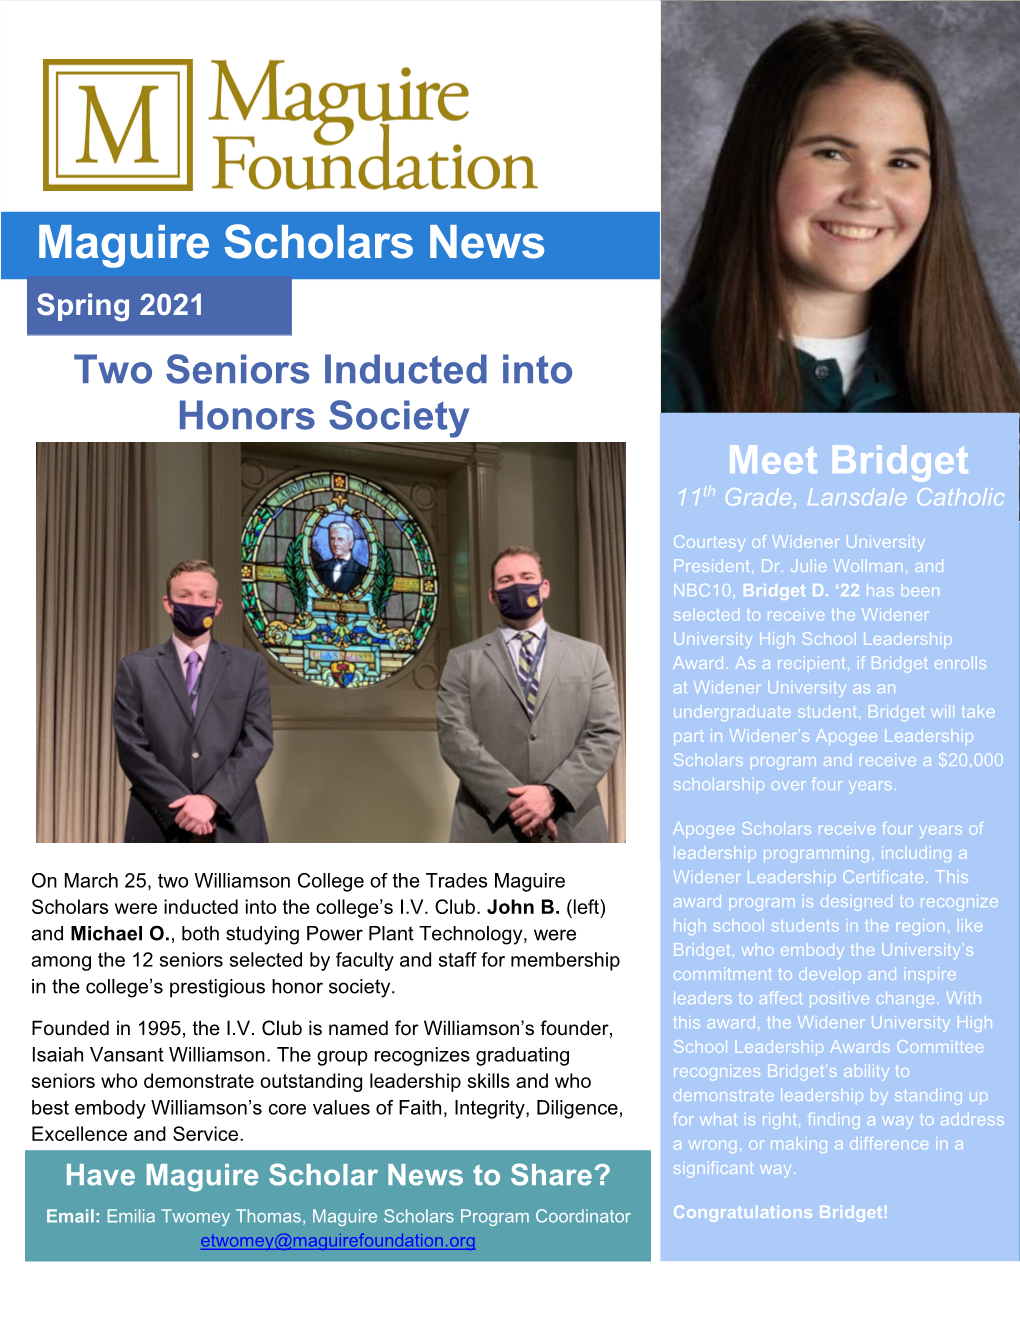 Spring 2021 Two Seniors Inducted Into Honors Society Meet Bridget 11Th Grade, Lansdale Catholic